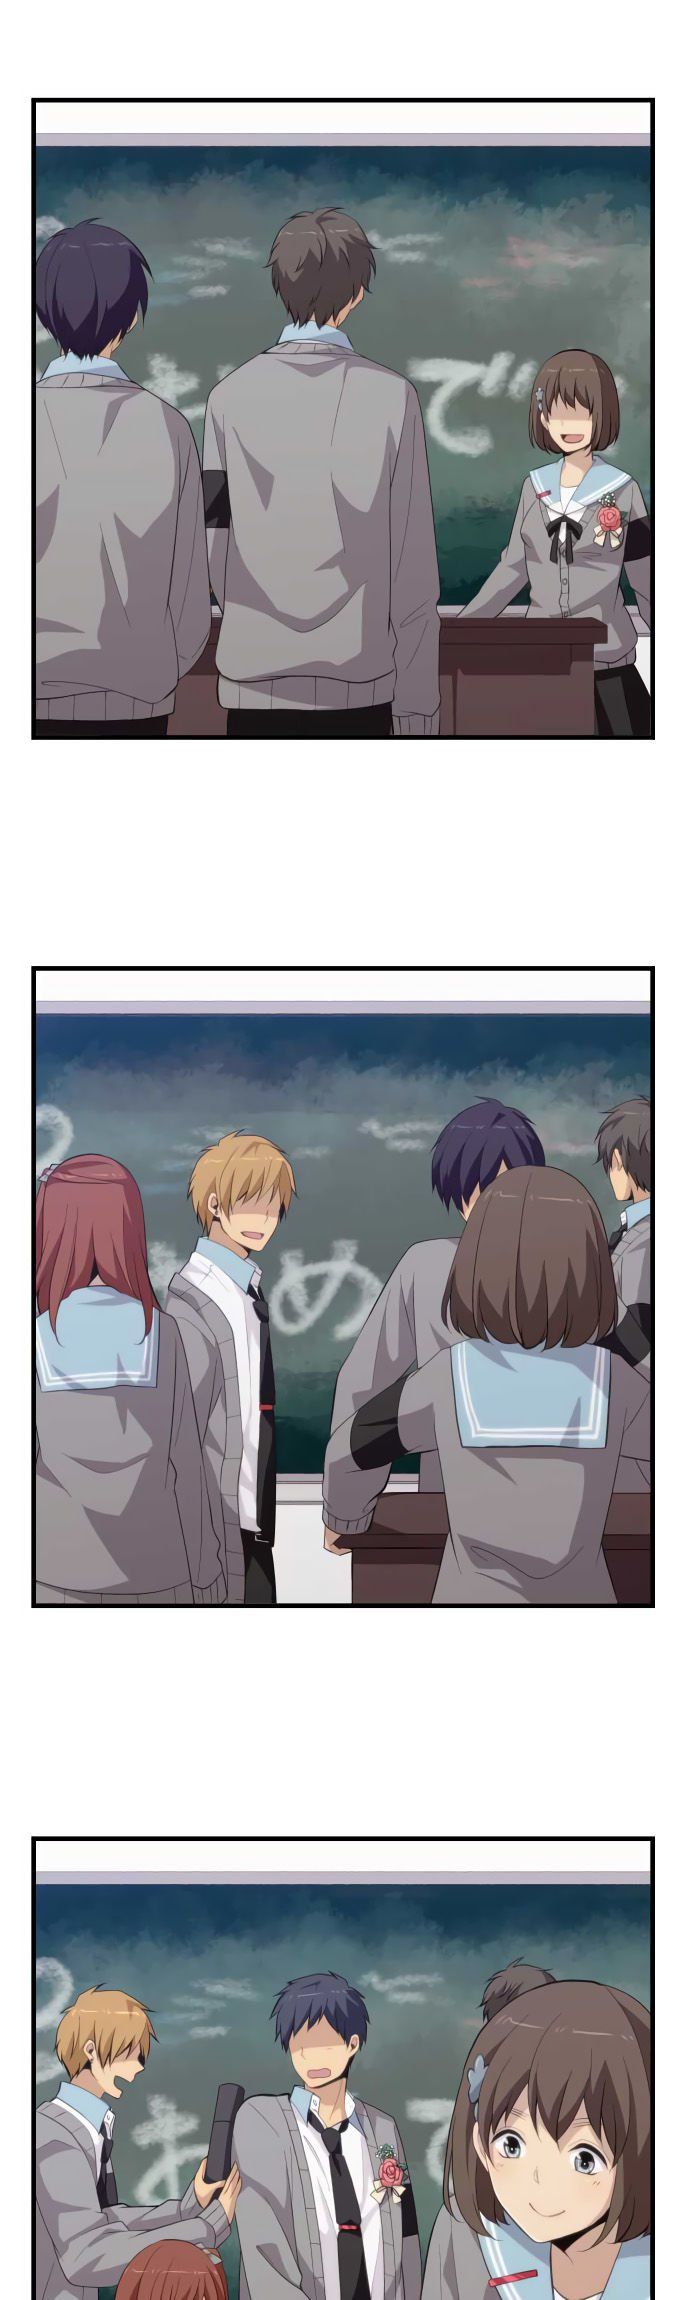 ReLIFE - Chapter 212.1 Page 6